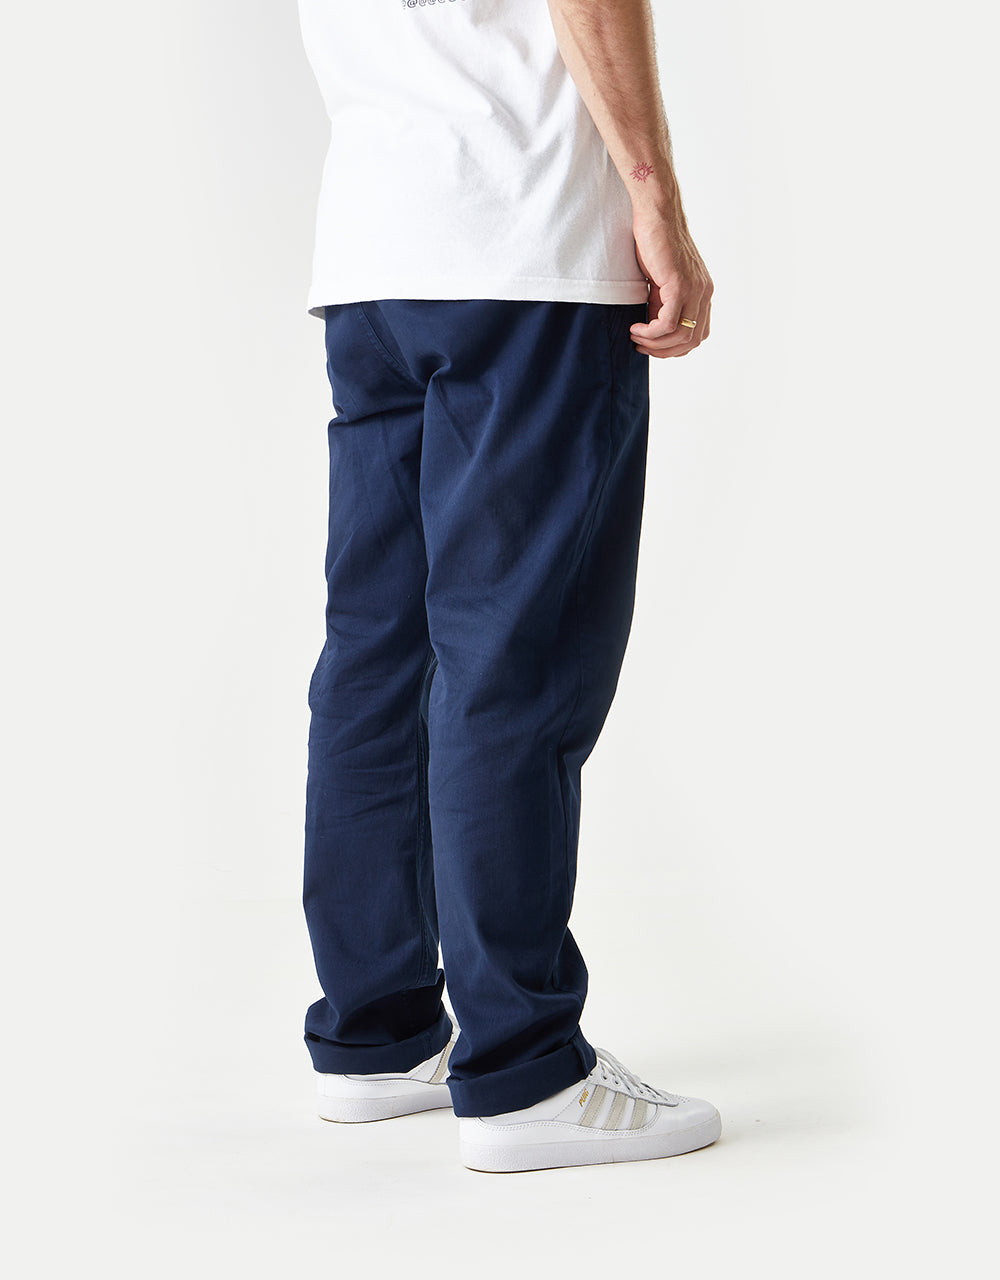 Route One Premium Relaxed Fit Chinos - Navy